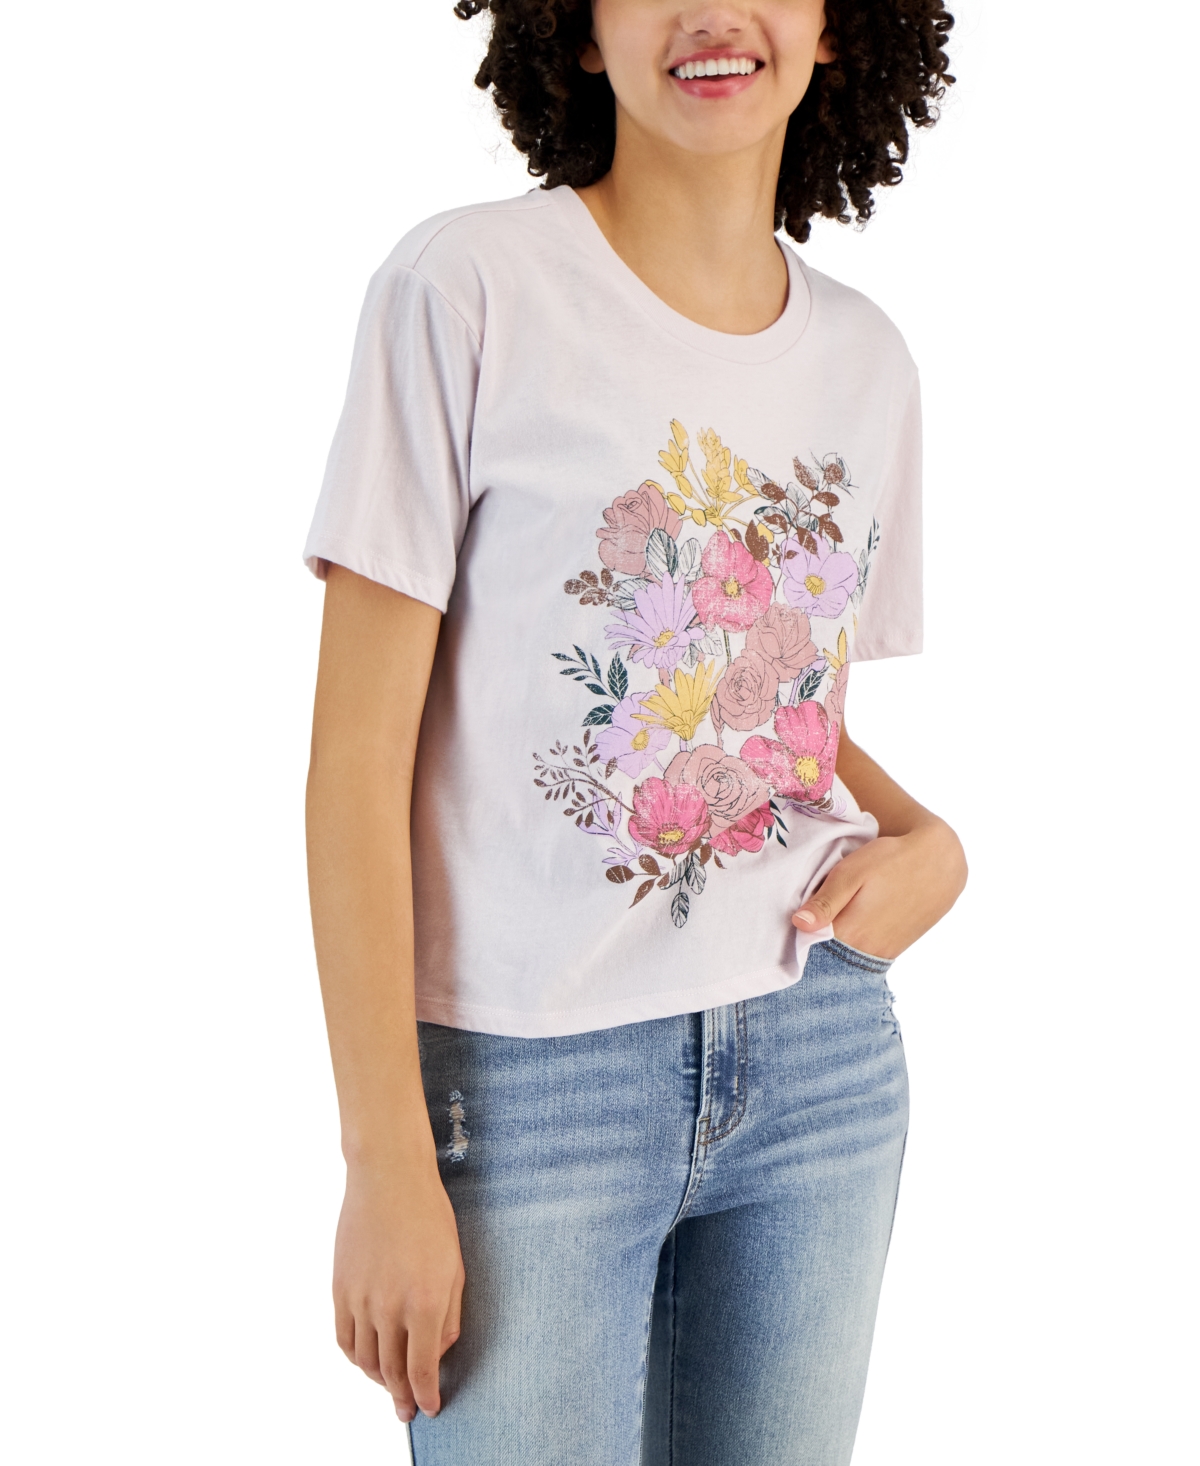 Rebellious One Juniors' Short-sleeve Floral Graphic T-shirt In Orchid Ice